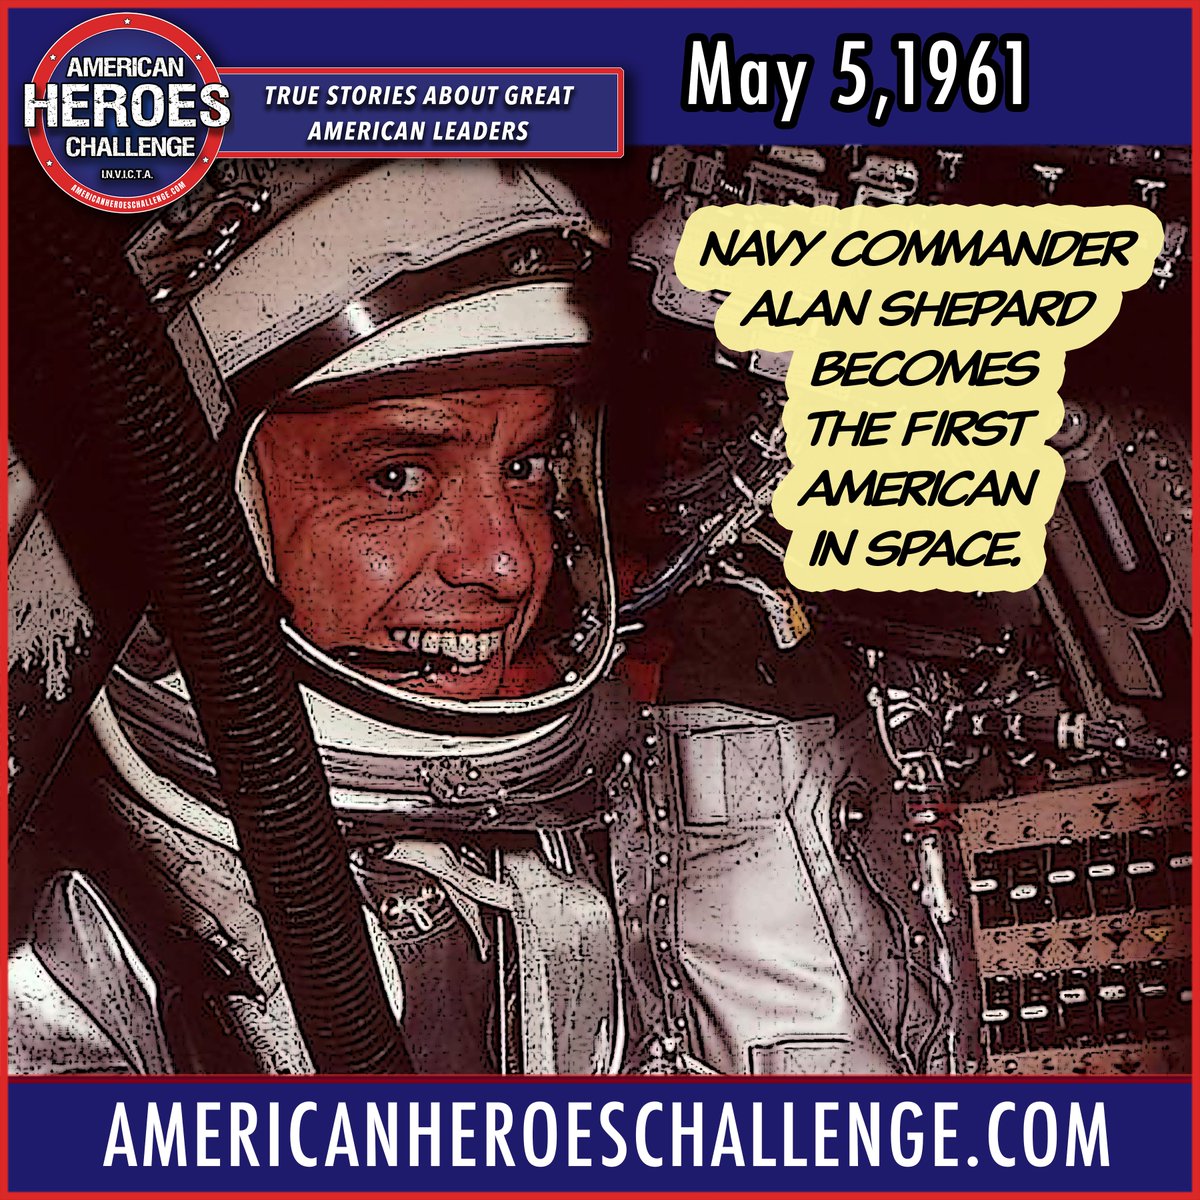 (1) Alan Shephard, a United States Naval aviator, became the first American and the second man in space on this day. Shepard was a remarkable American and an impressive leader. Learn about him and share his story. 🧵#usnavy #americanhistory